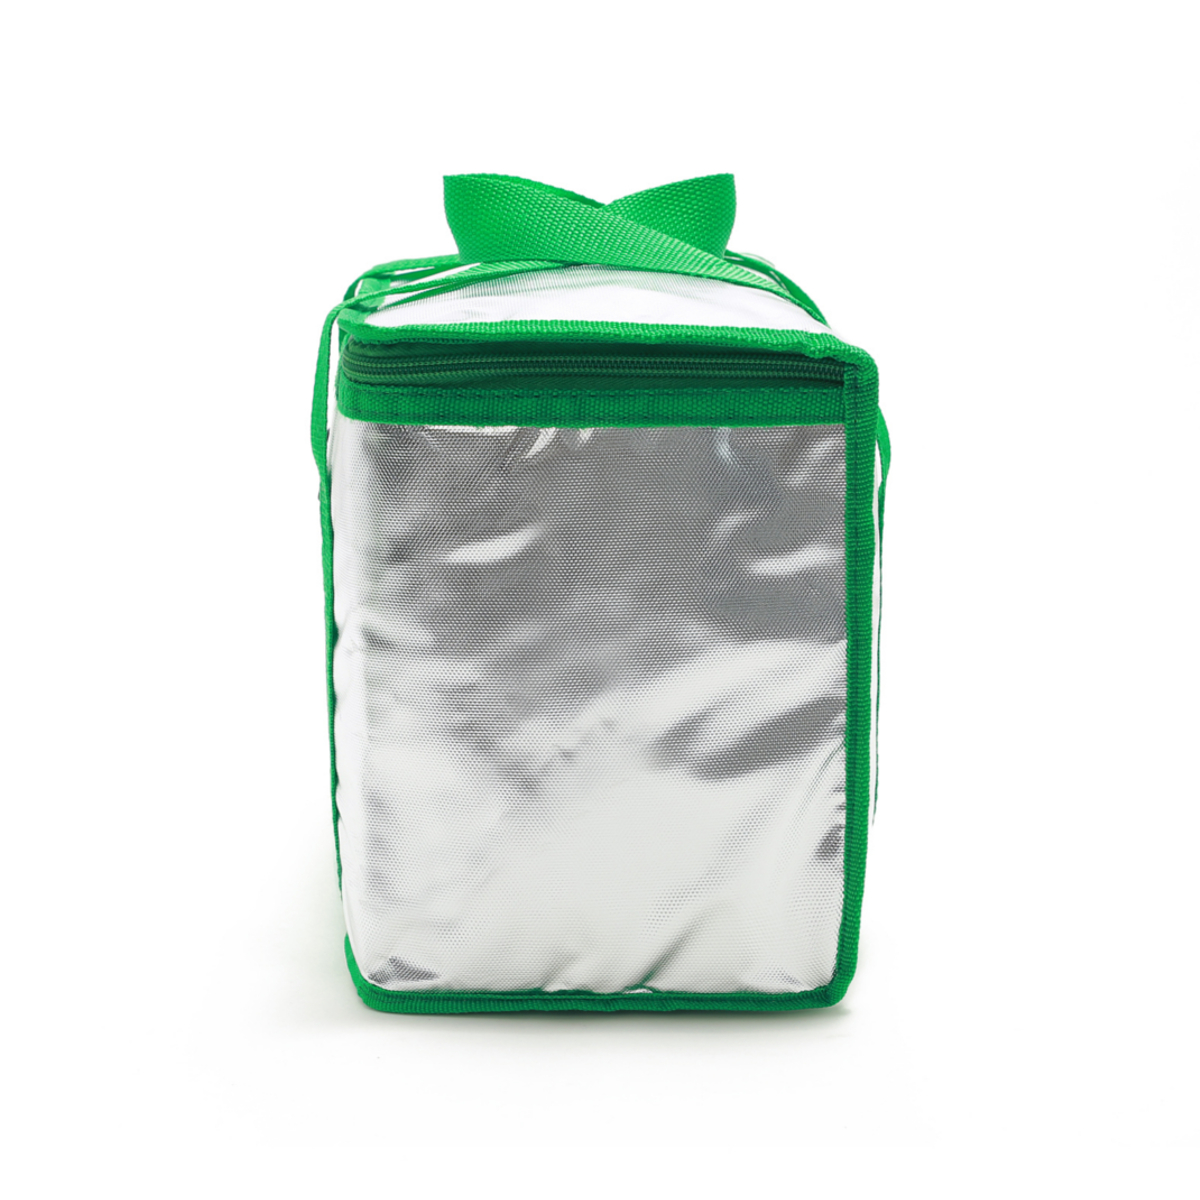 81626L-Picnic-Bag-Food-Delivery-Insulated-Bag-Lunch-Box-Storage-Bag-Outdoor-Camping-Travel-1855998-12